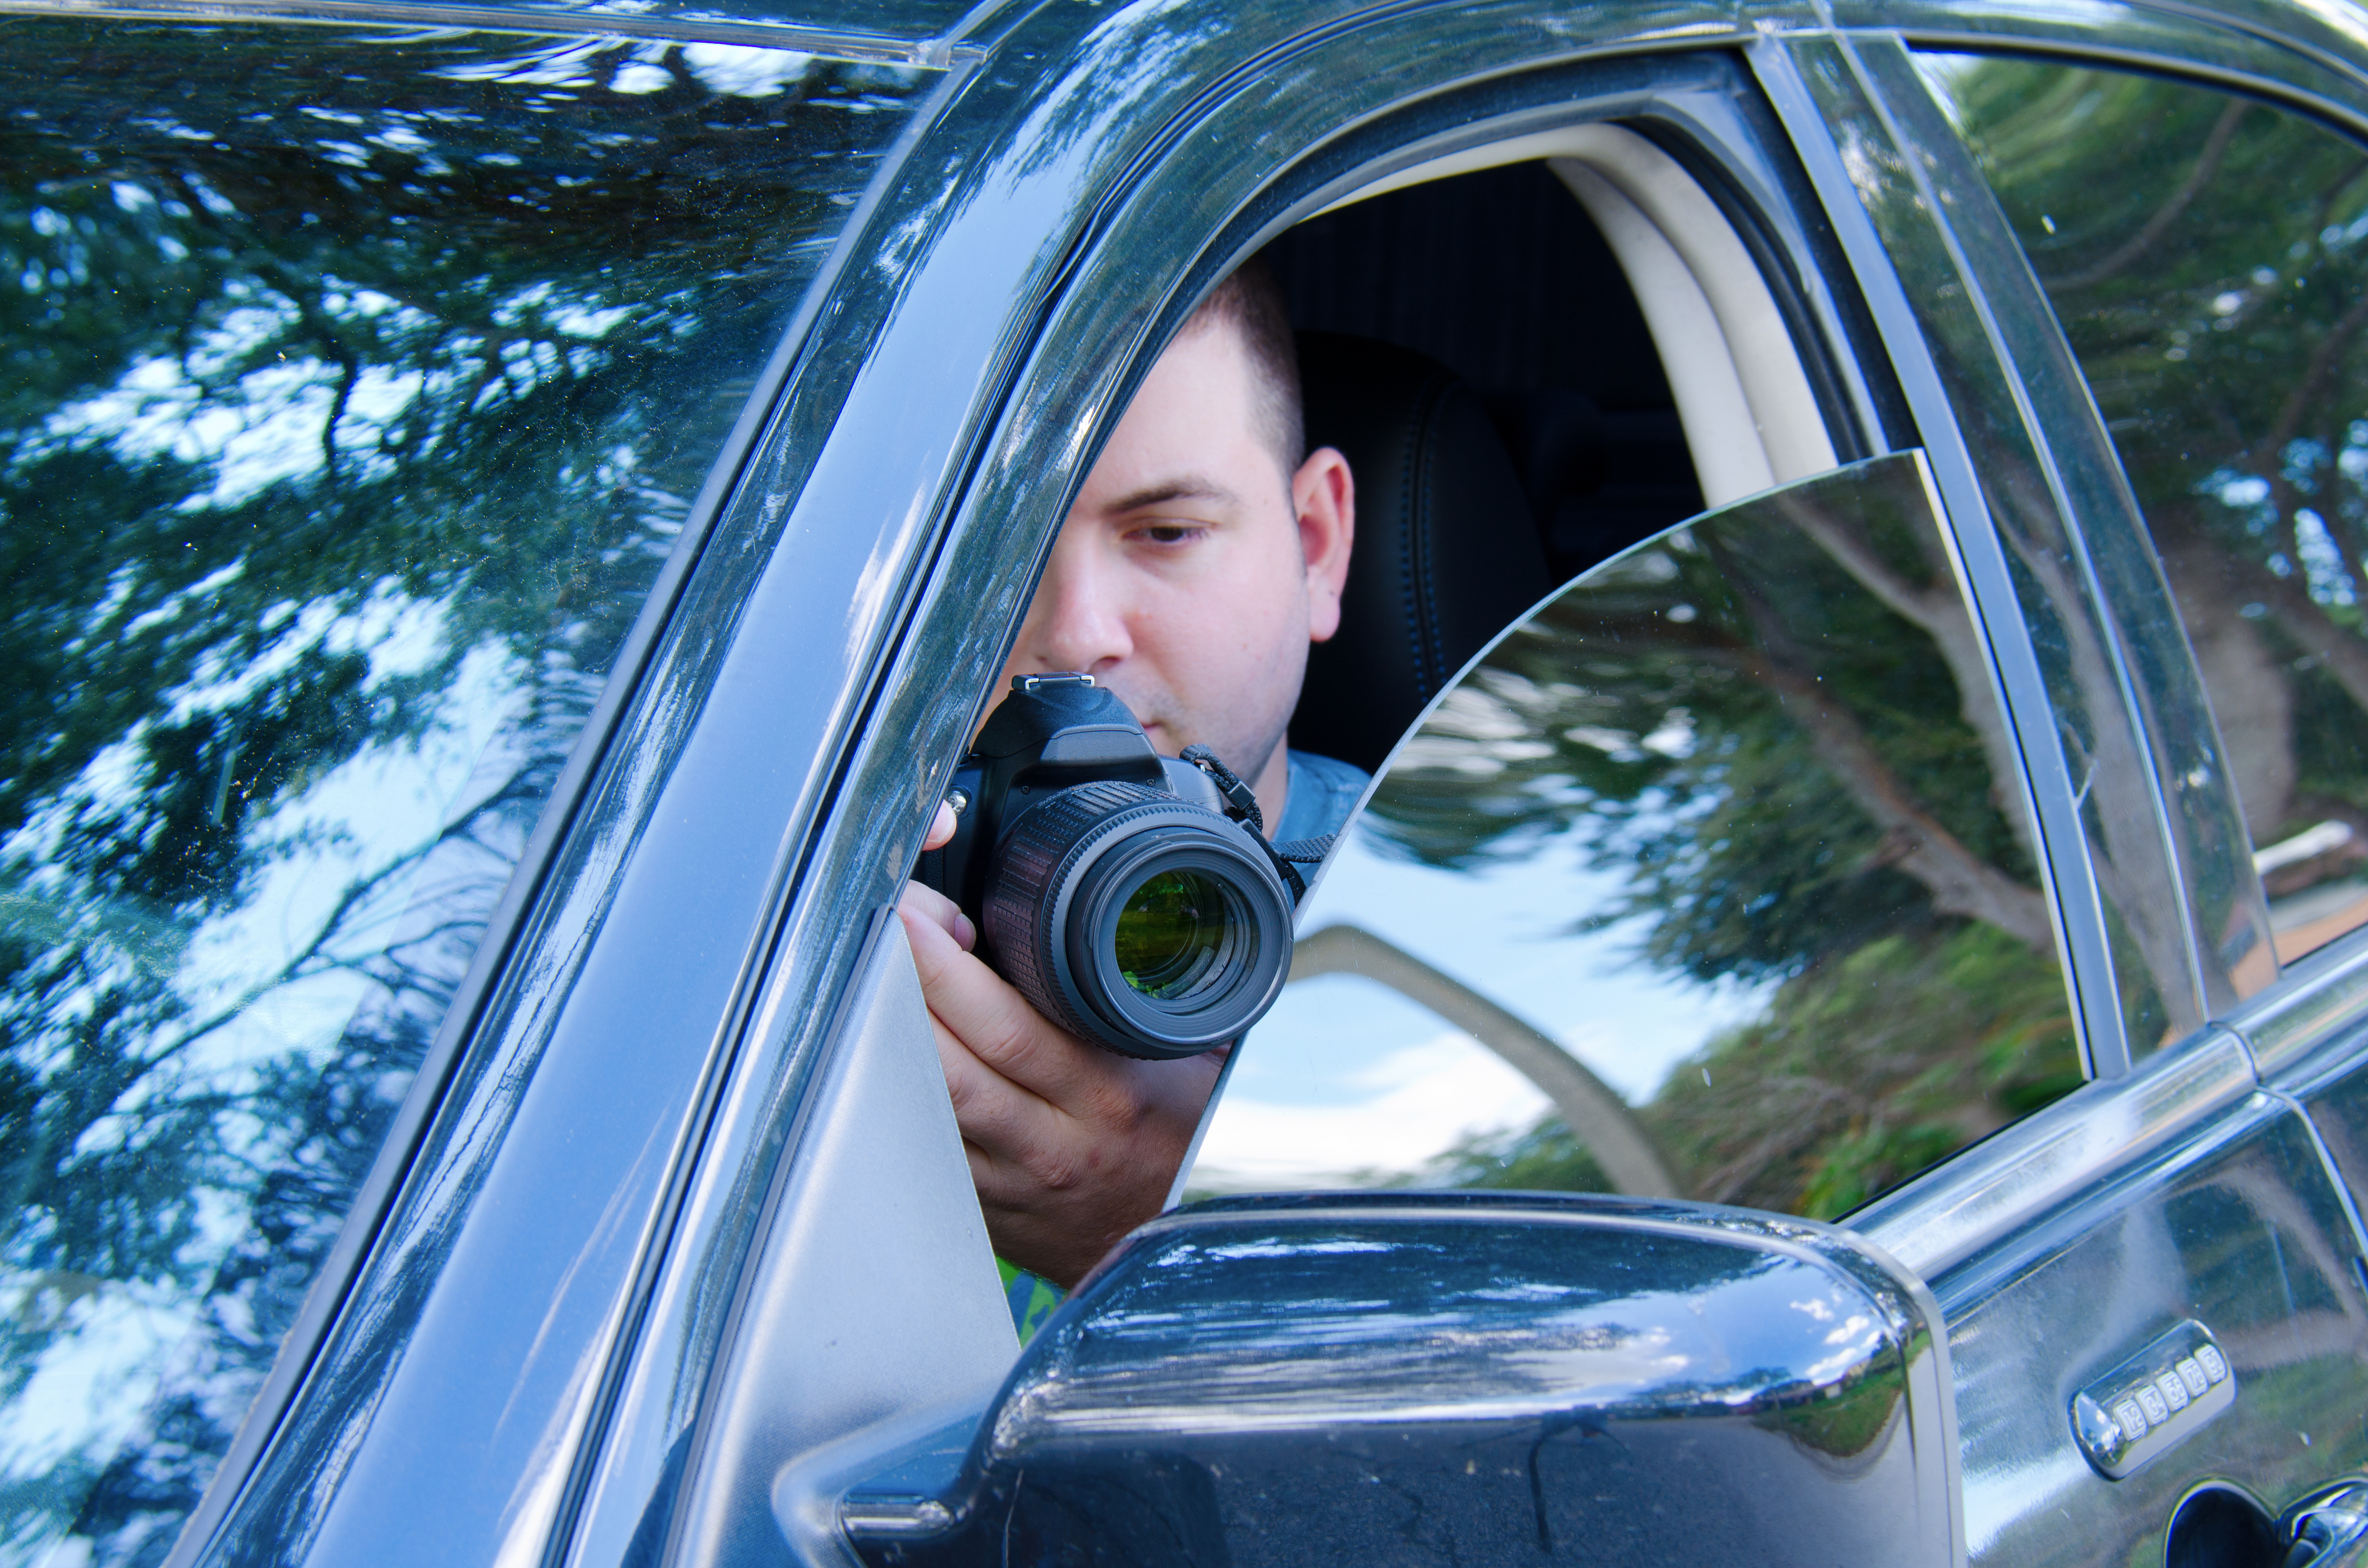 A man taking a photo from his car | Source: Shutterstock